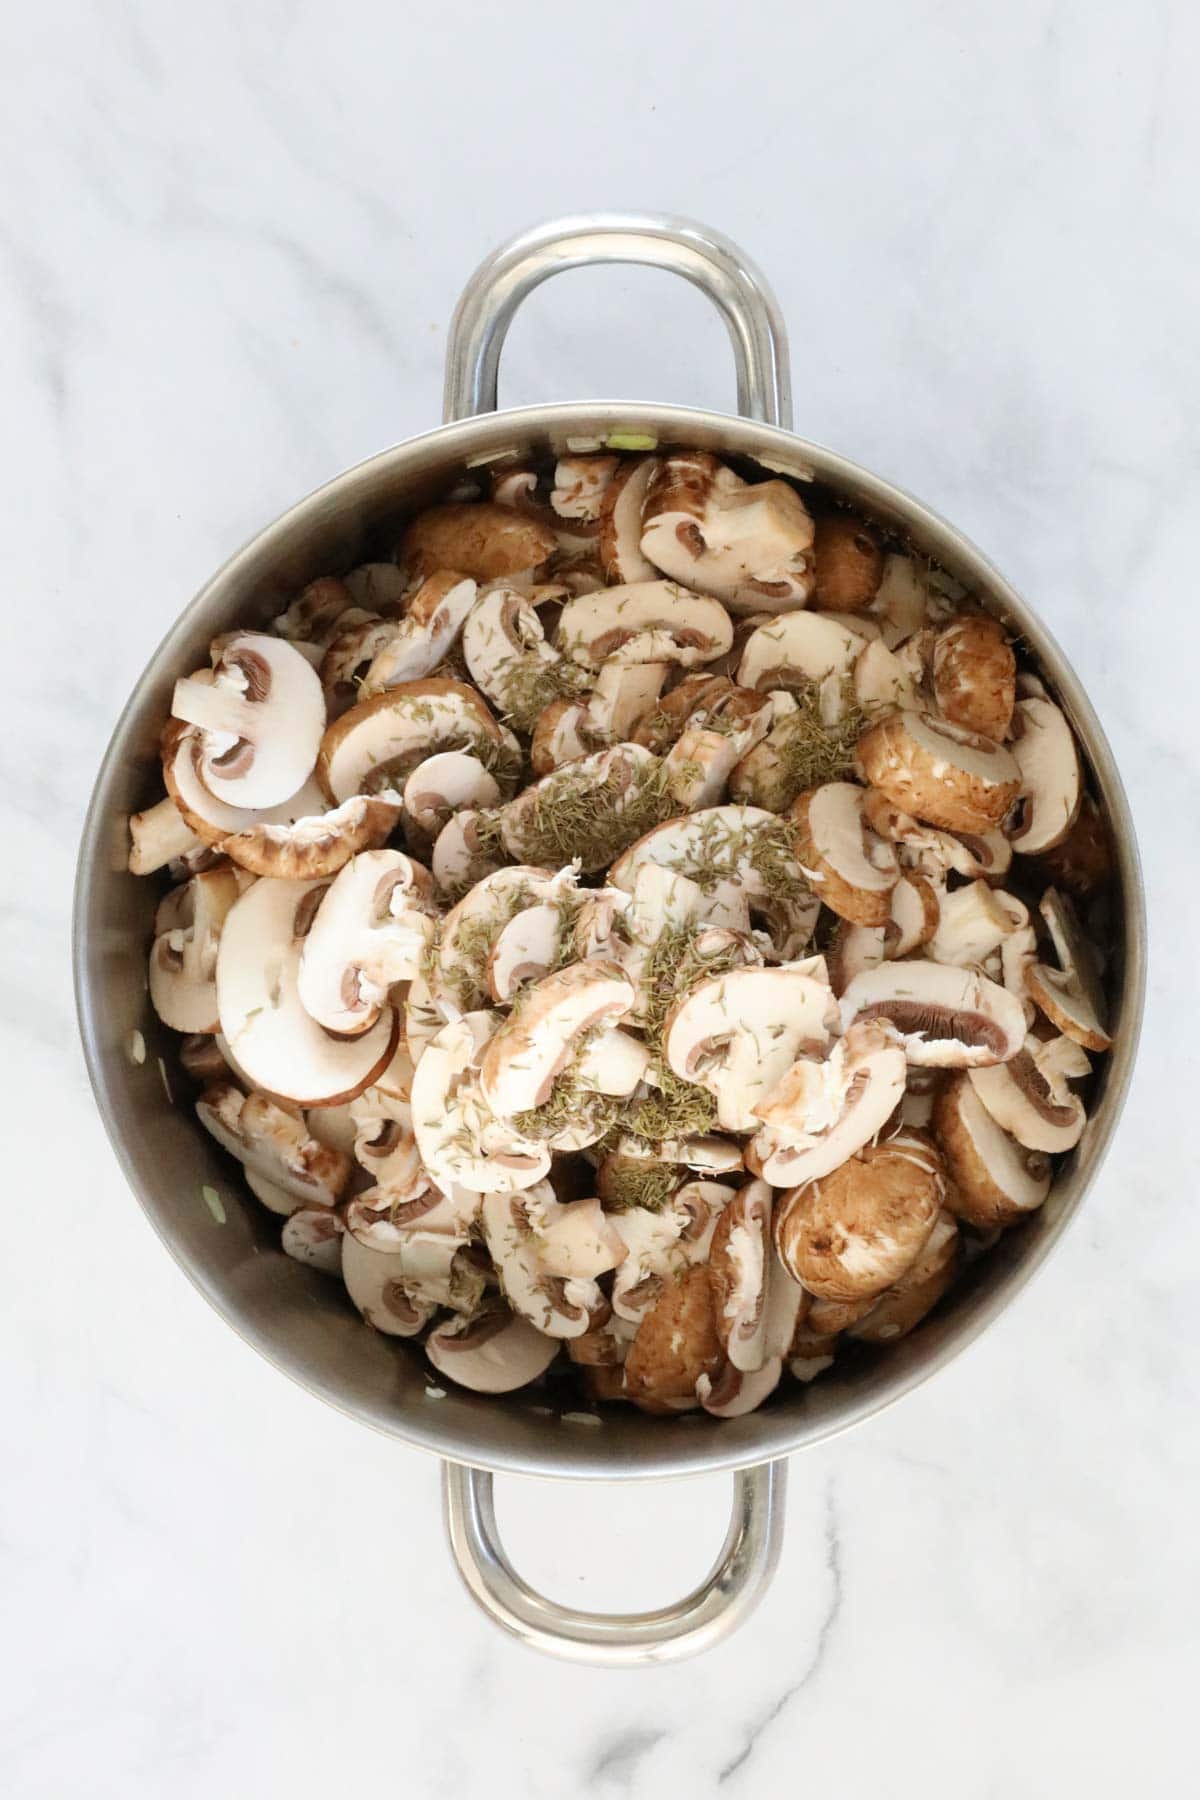 Sliced mushrooms and thyme added to the pan.